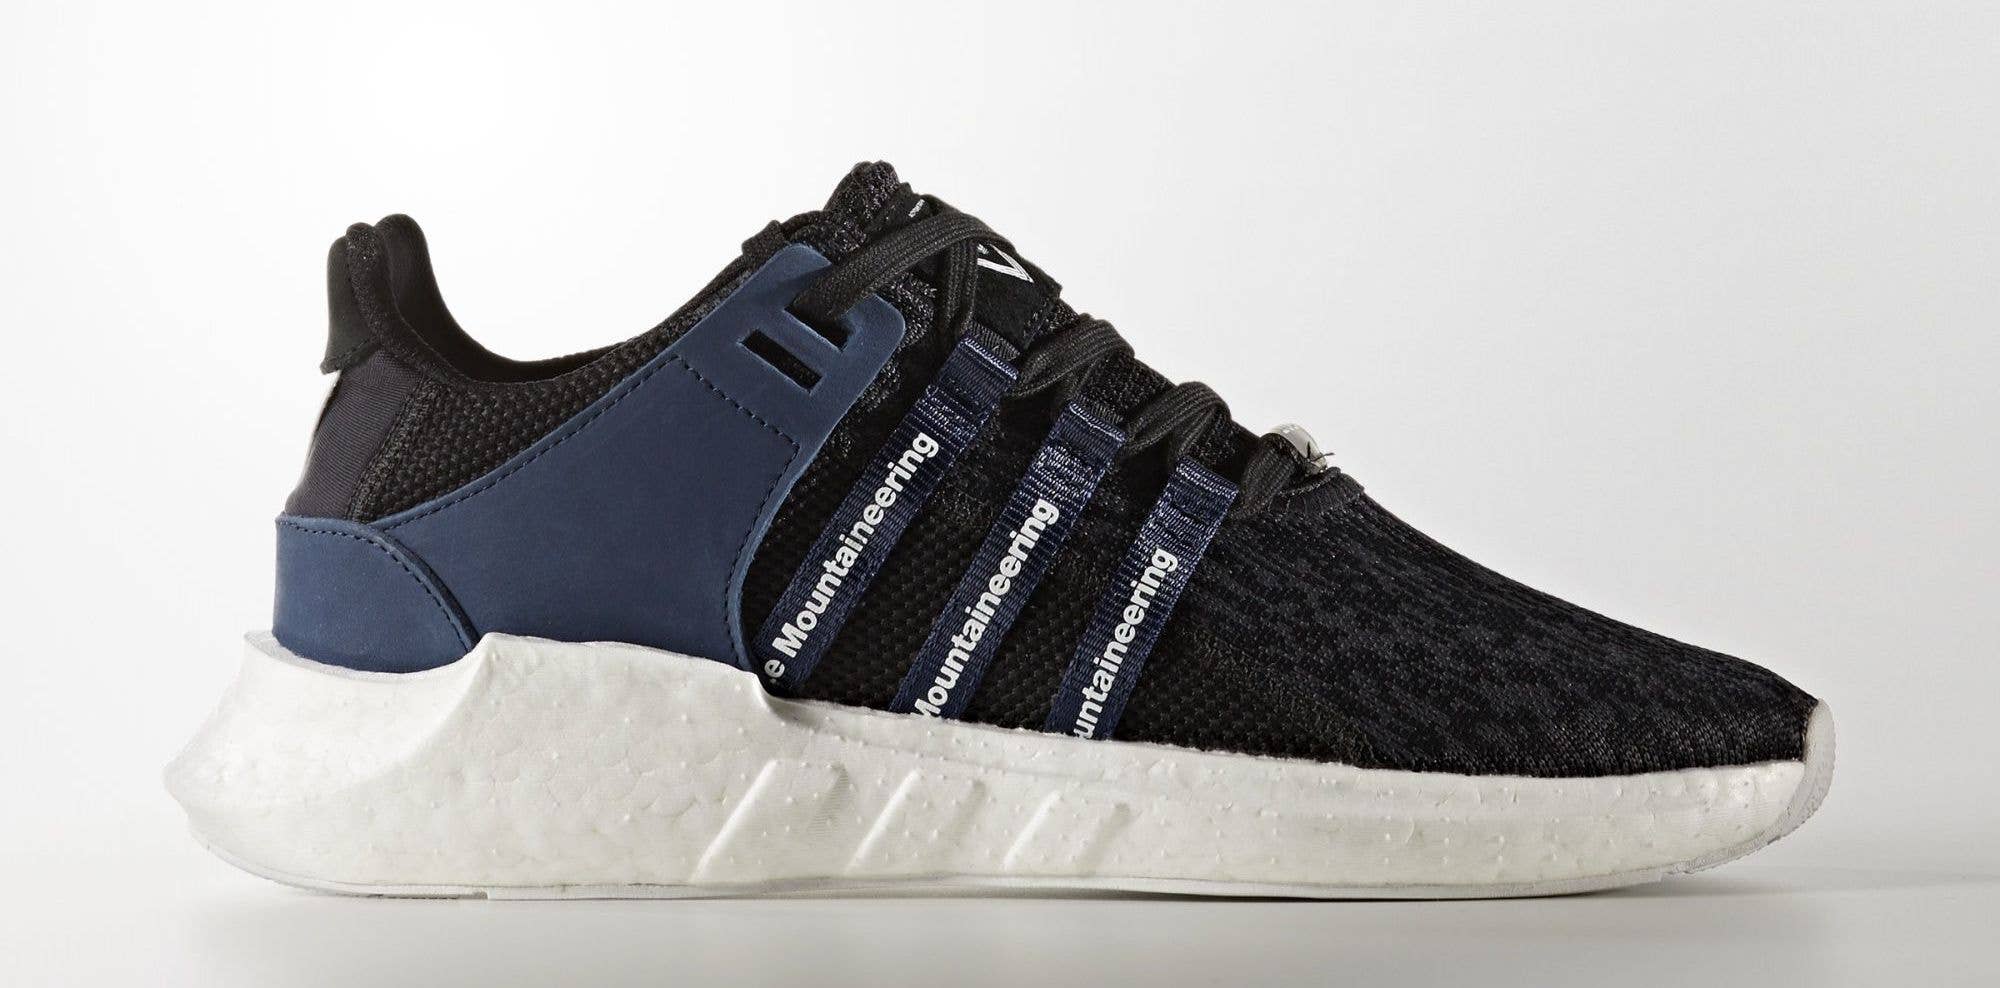 White Mountaineering x Adidas EQT Support 93 17 profile